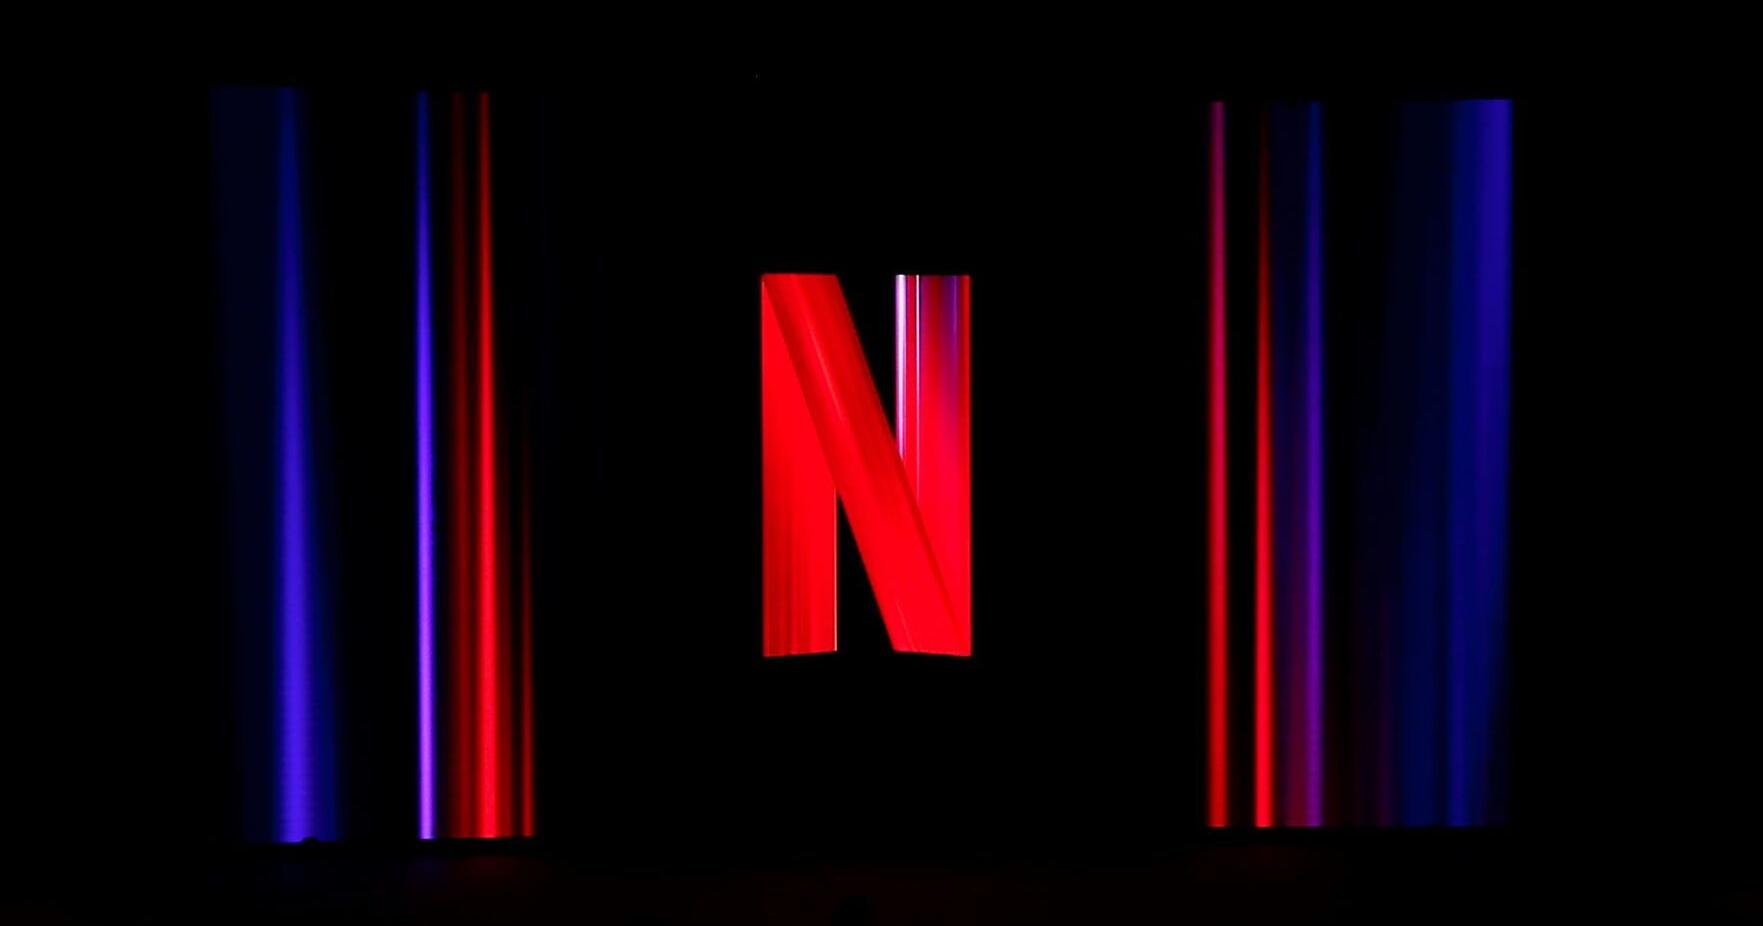 Early results indicate Netflix's new plan to boost its bottom line by cracking down on password sharing in the United States is paying off.